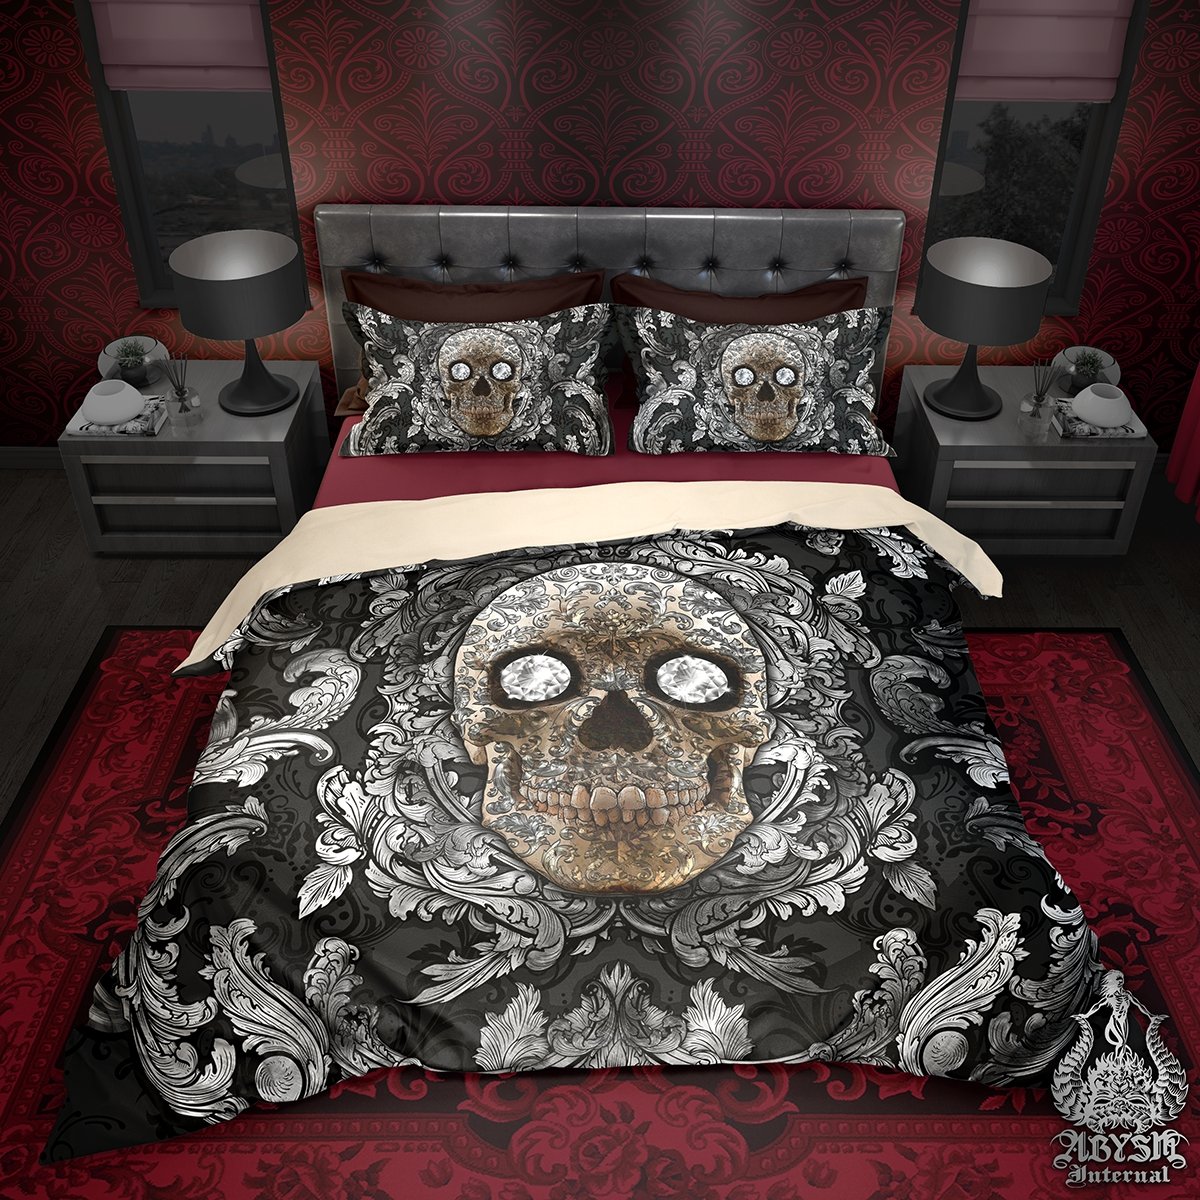 Skull Bedding Set, Comforter and Duvet, Victorian Goth Bed Cover and Bedroom Decor, King, Queen and Twin Size - Silver and Diamonds - Abysm Internal